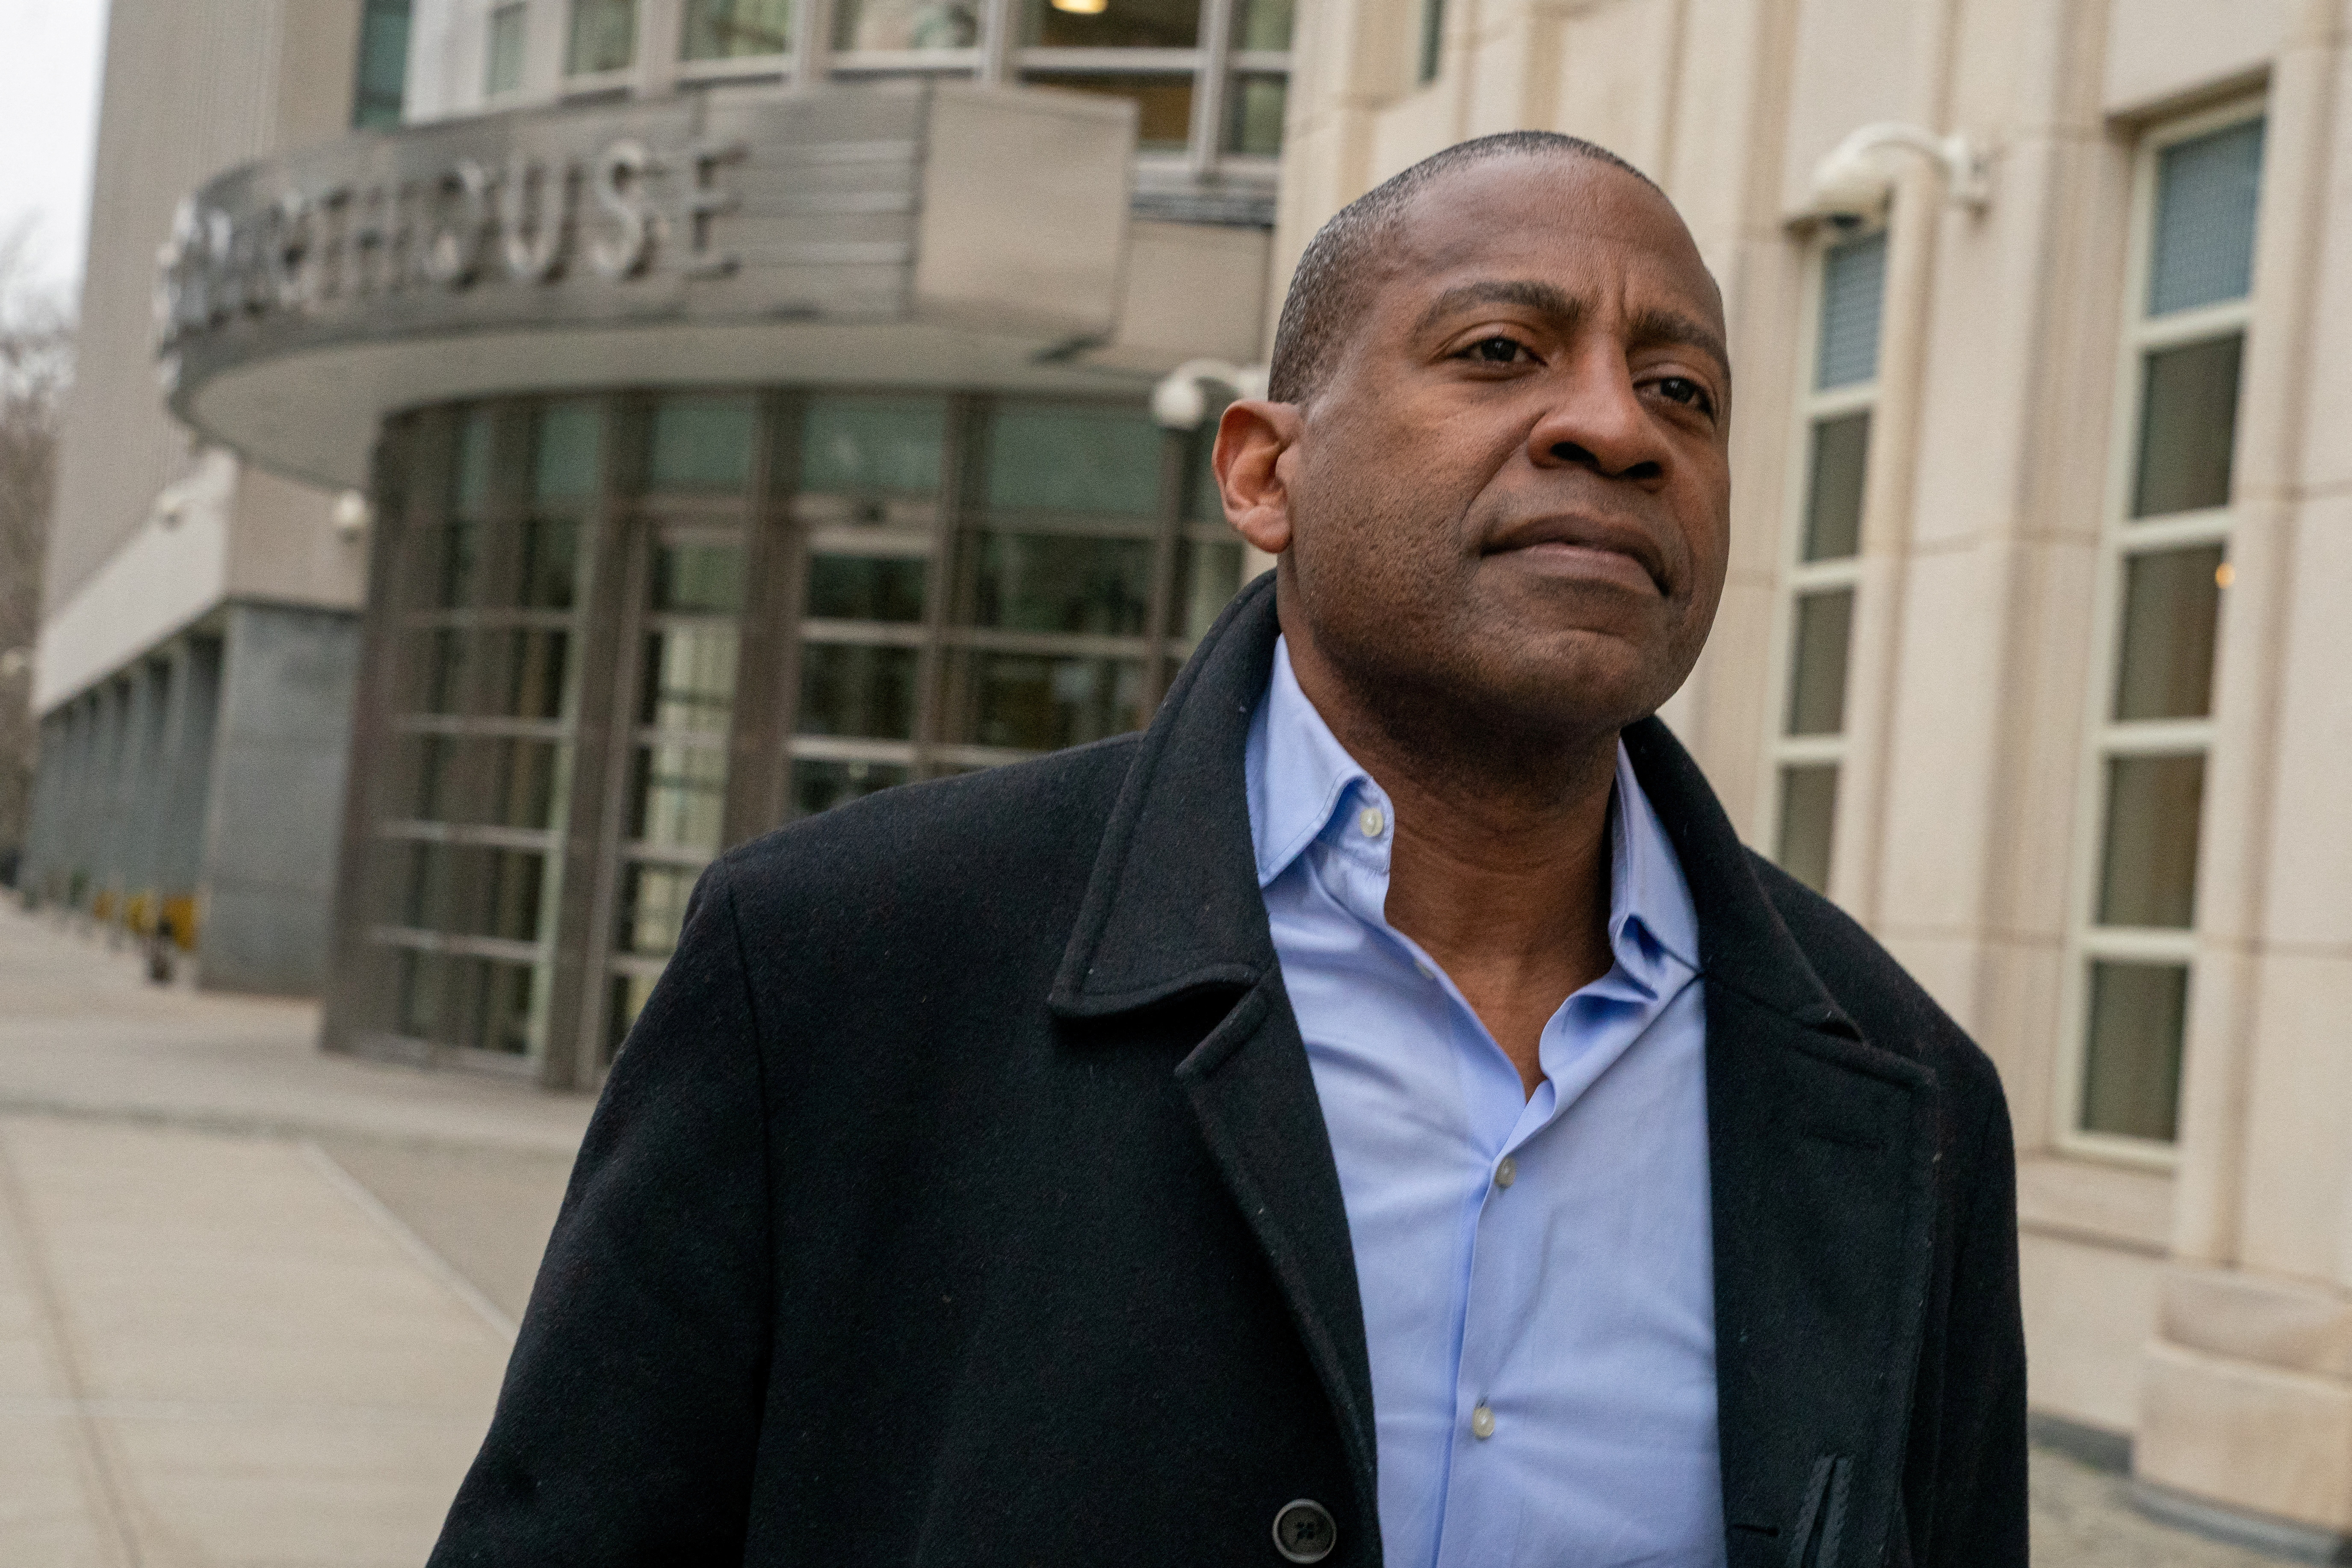 Carlos Watson, CEO of Ozy Media, departs U.S. Federal Court in Brooklyn after being arrested and charged with fraud